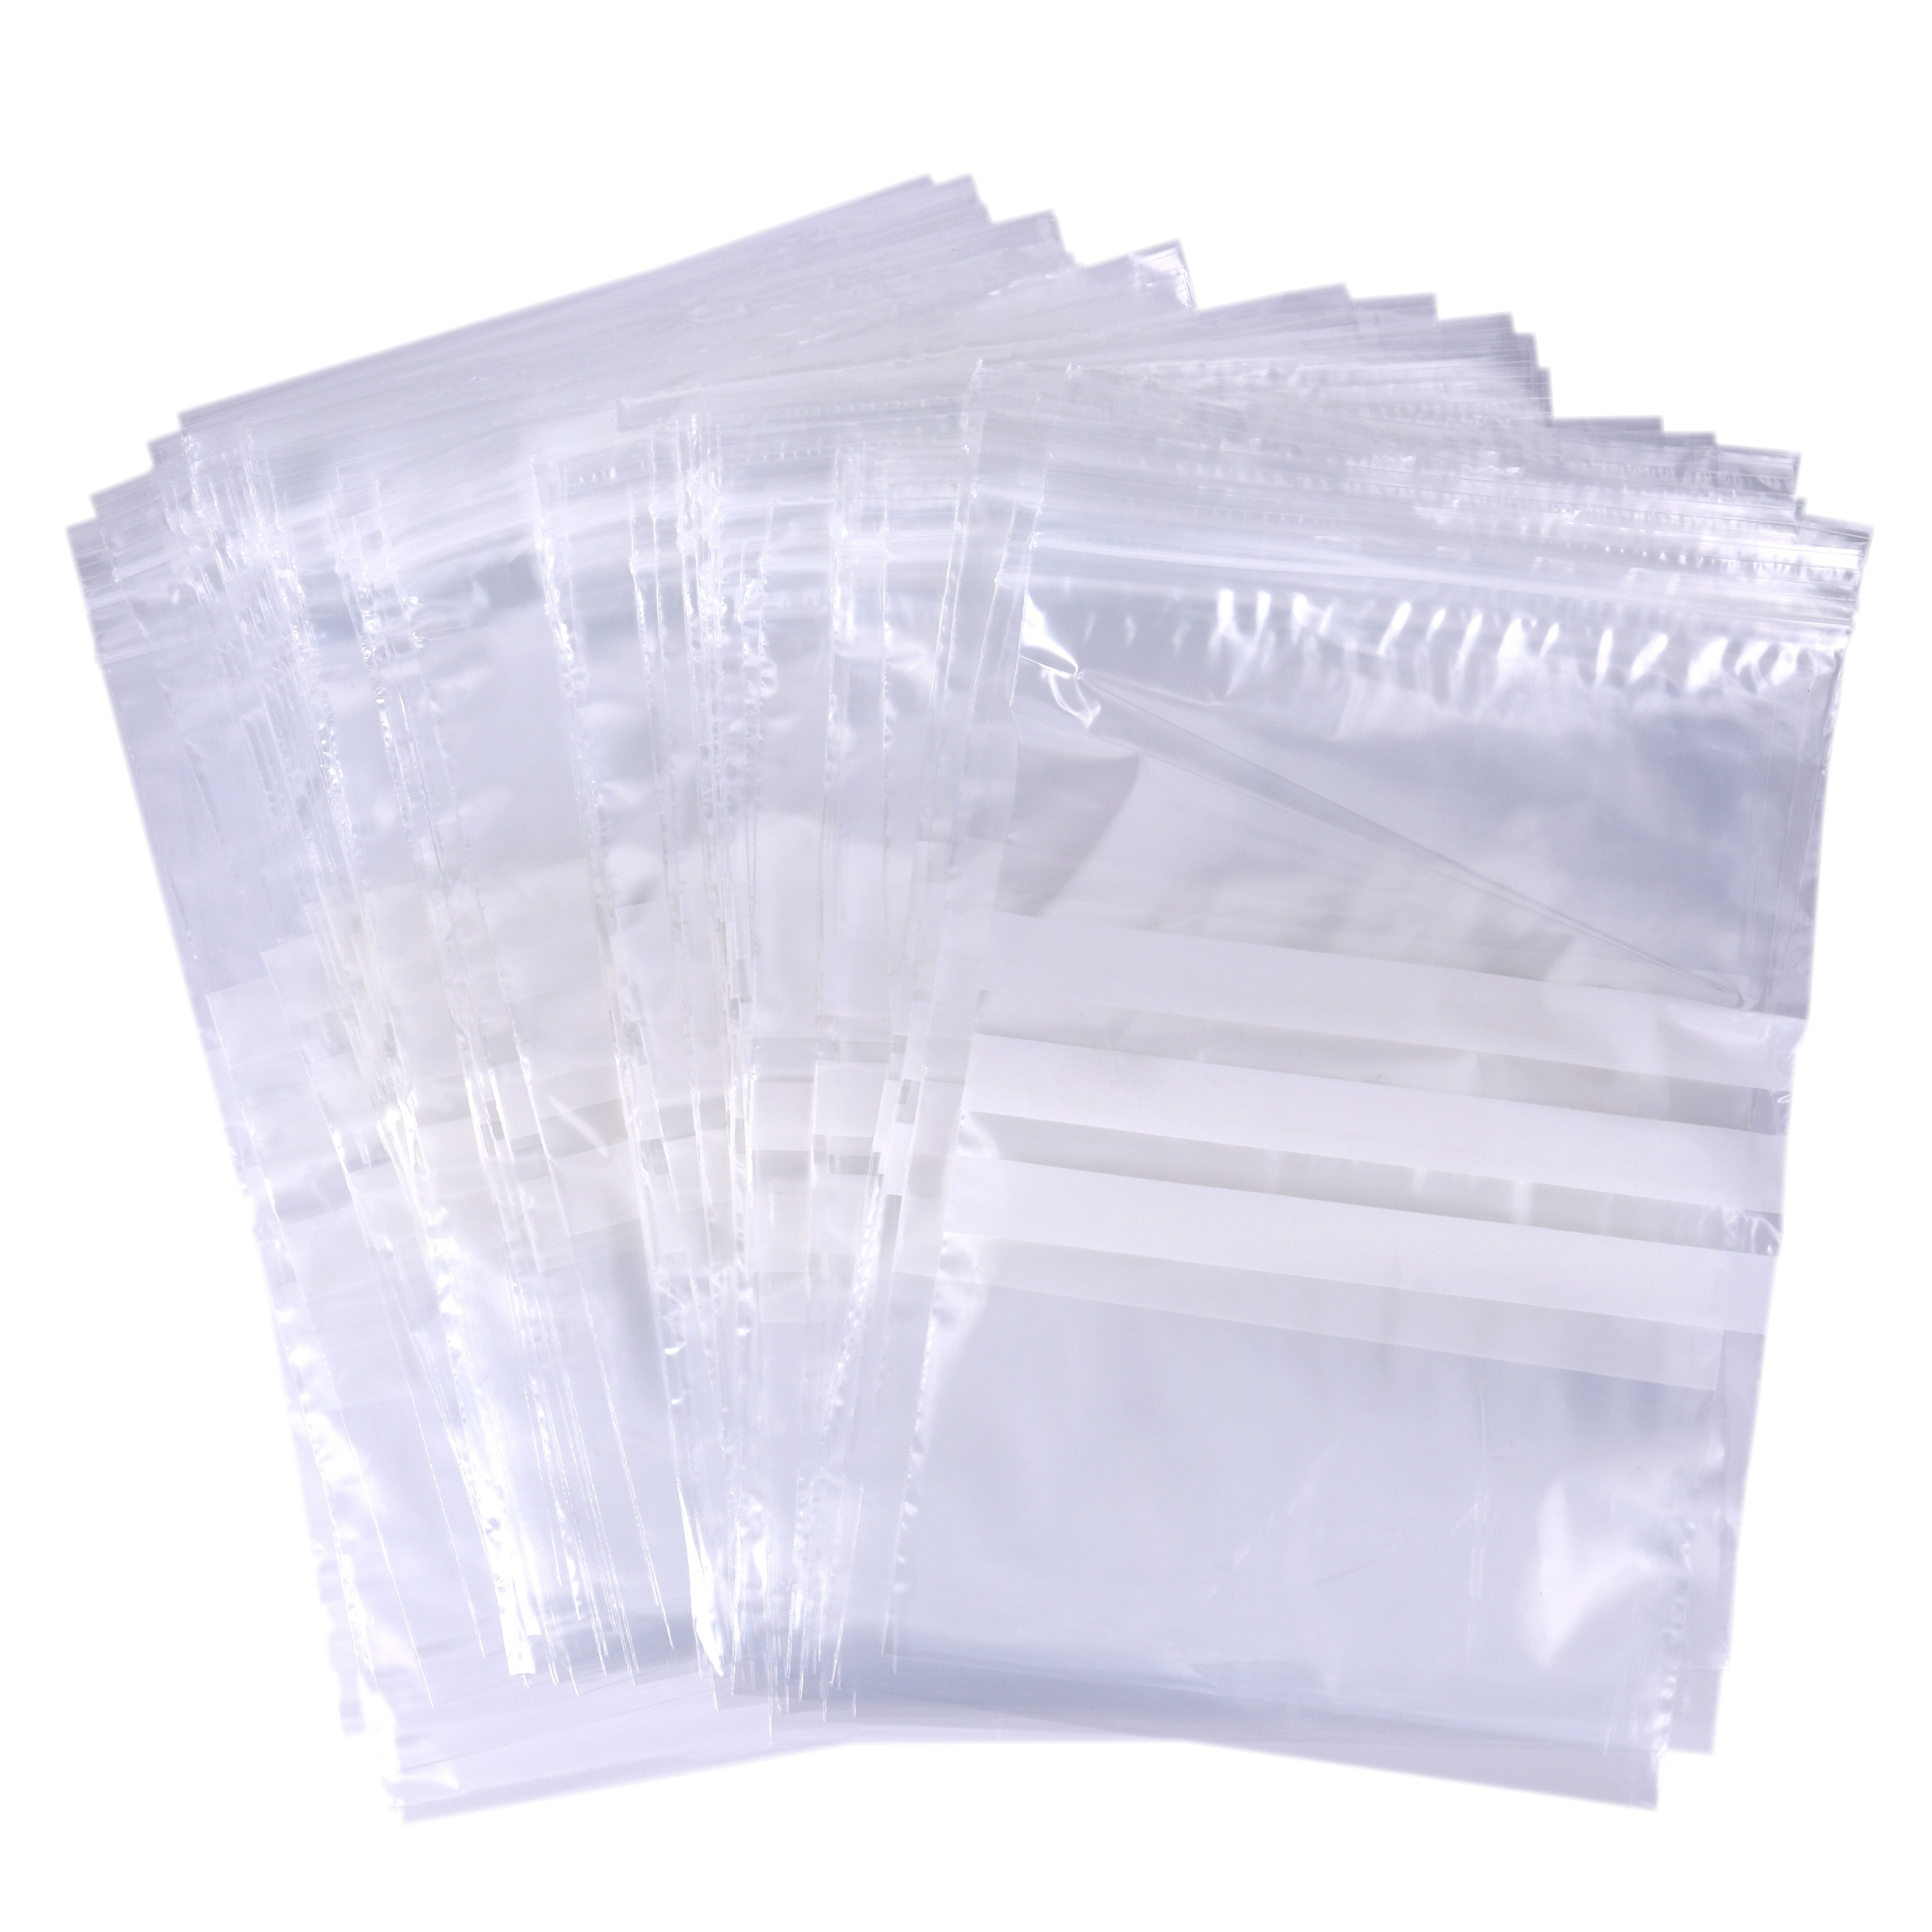 Resealable Poly Bag Write On 203 X 279mm